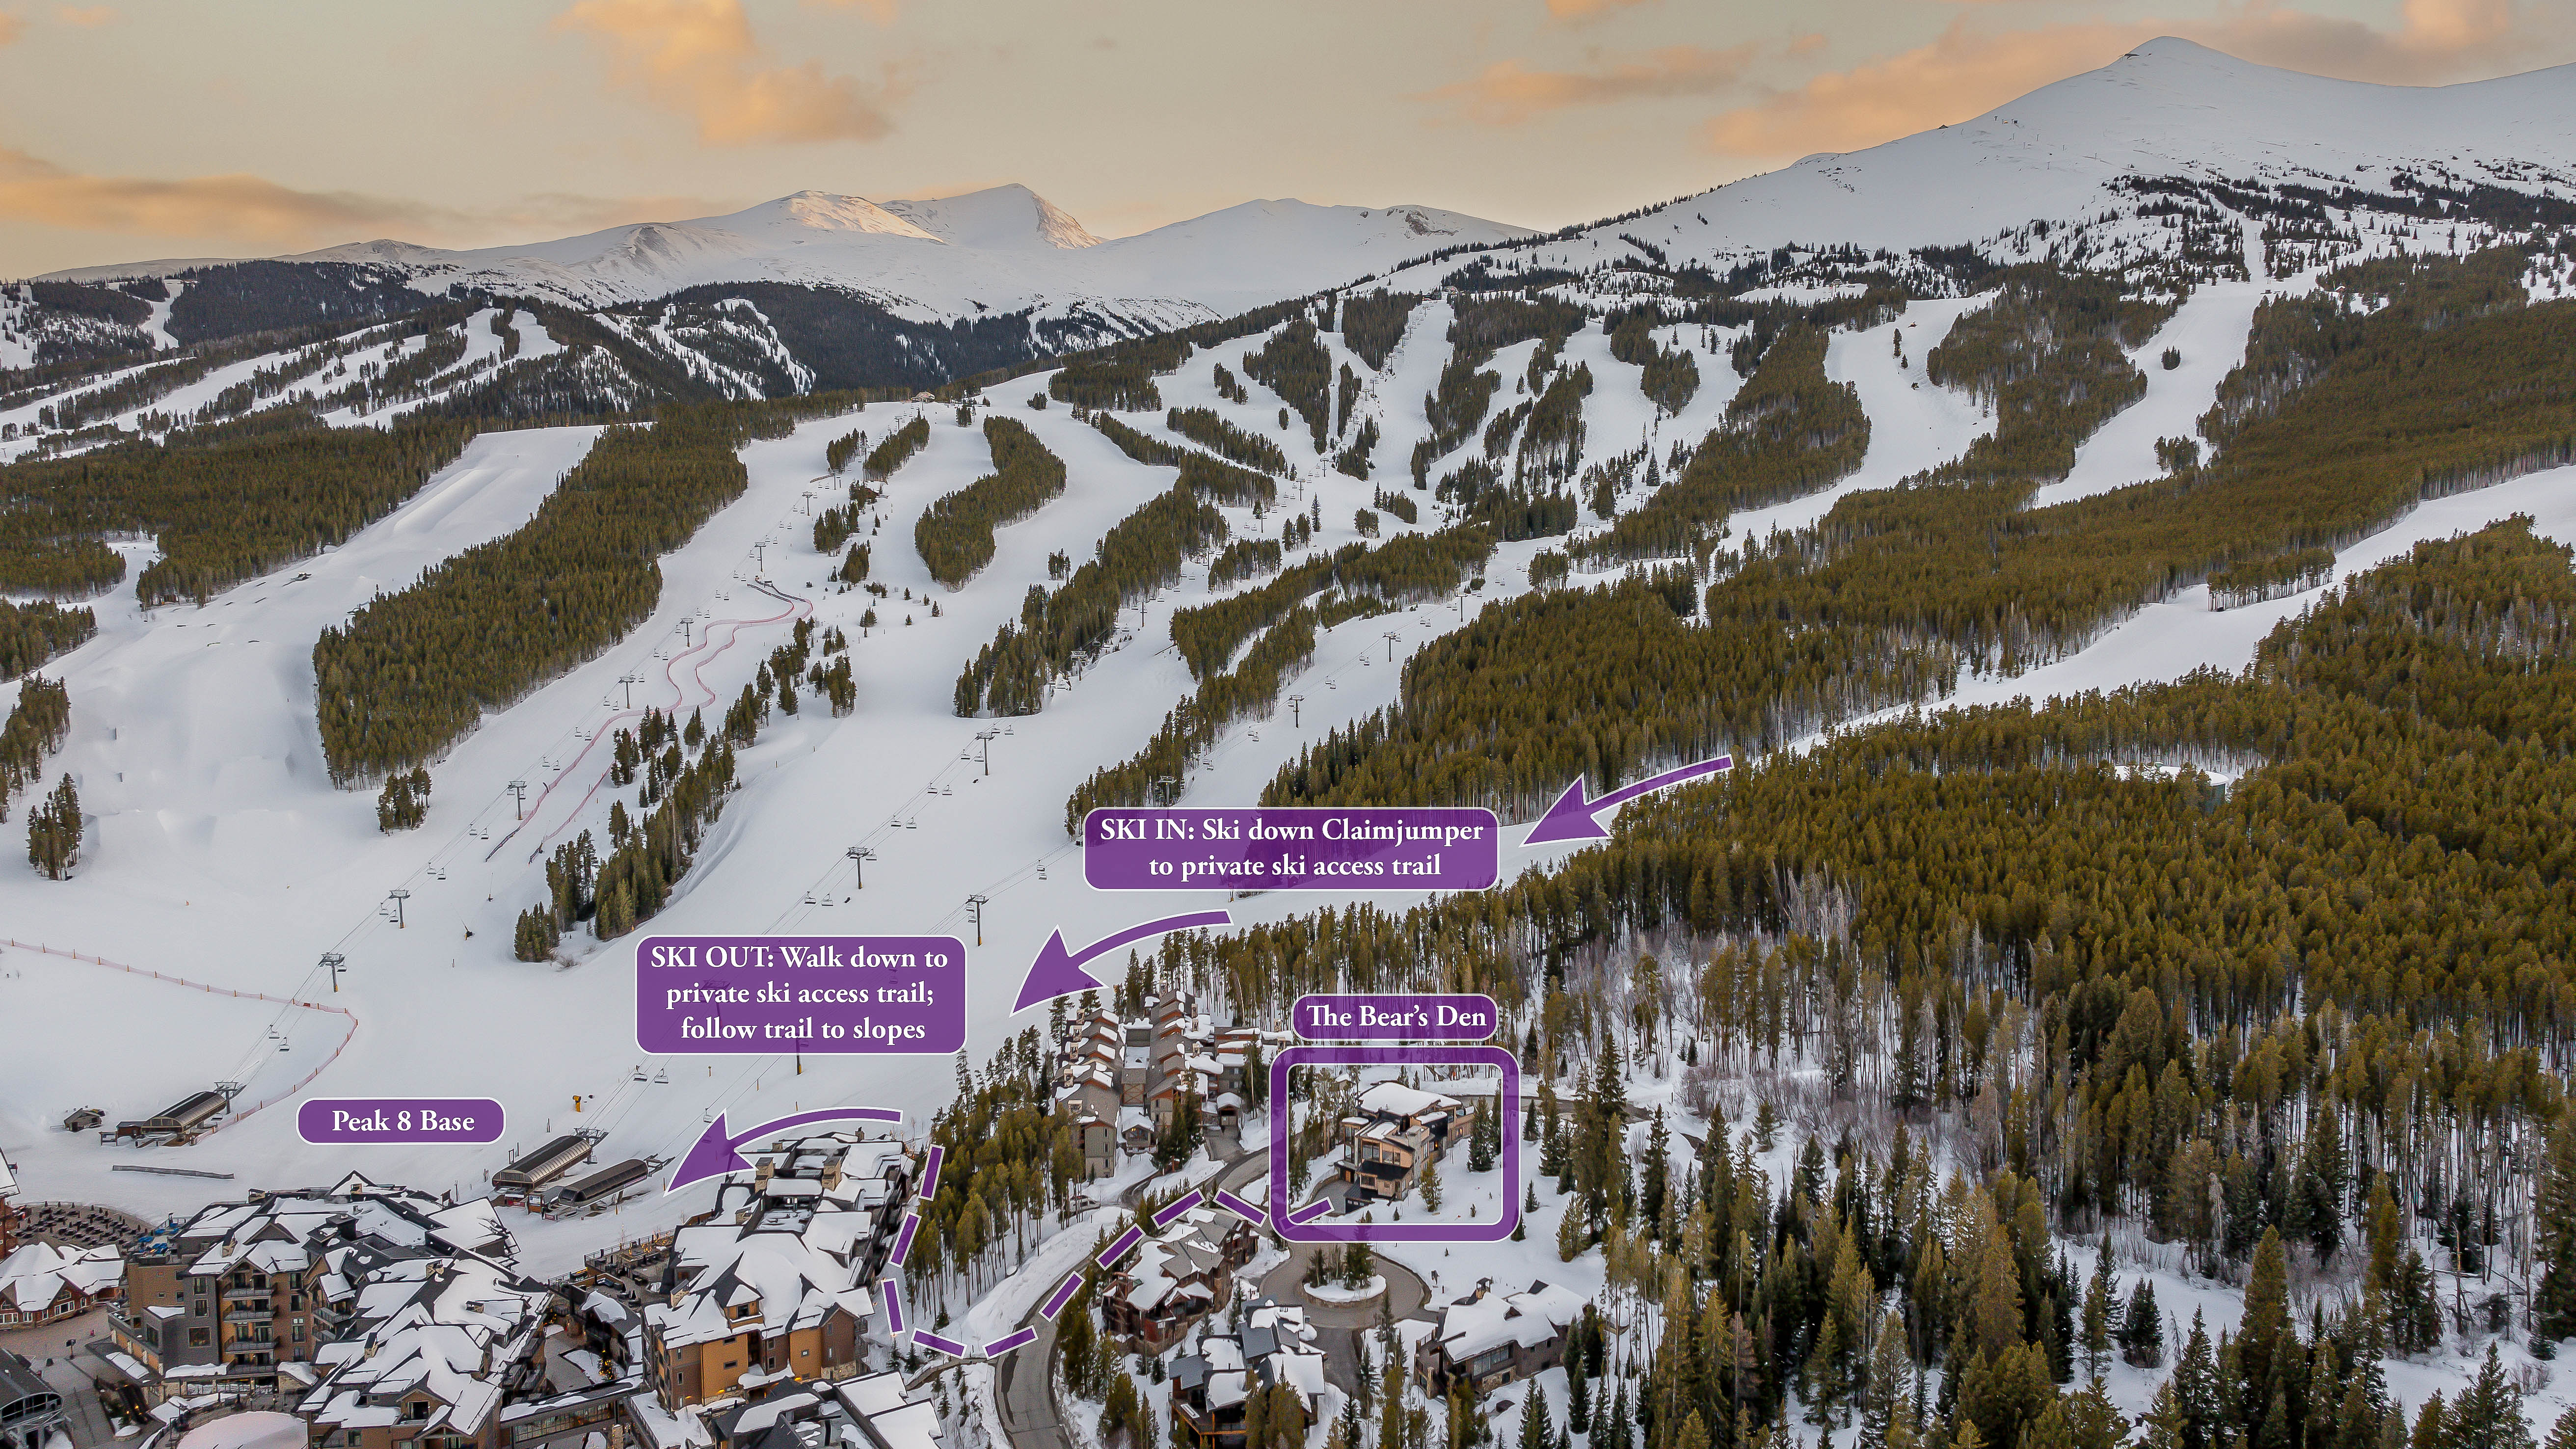 Ski access aerial map of The Bear's Den